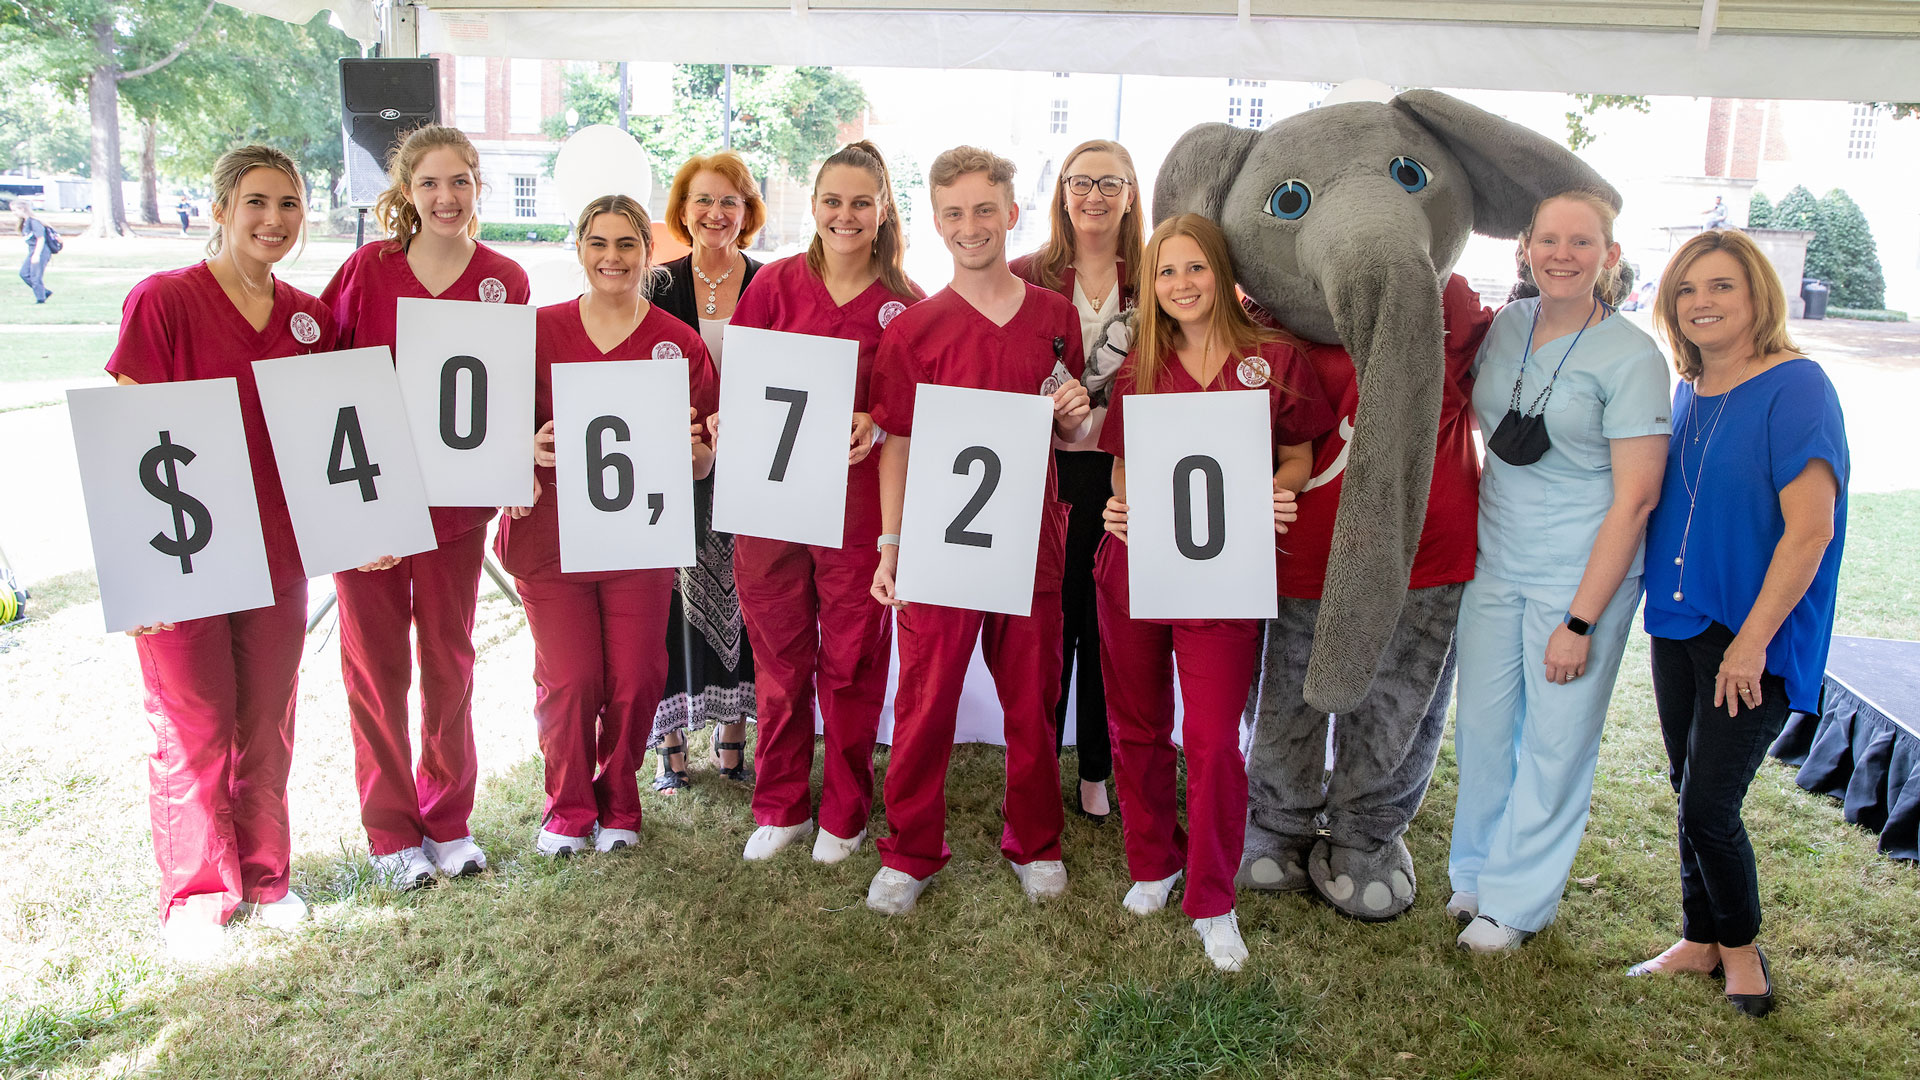 a group of nursing students wearing crimson scrubs smile while holding up numbers to denote the 2021 campaign fundraising total of $406,720